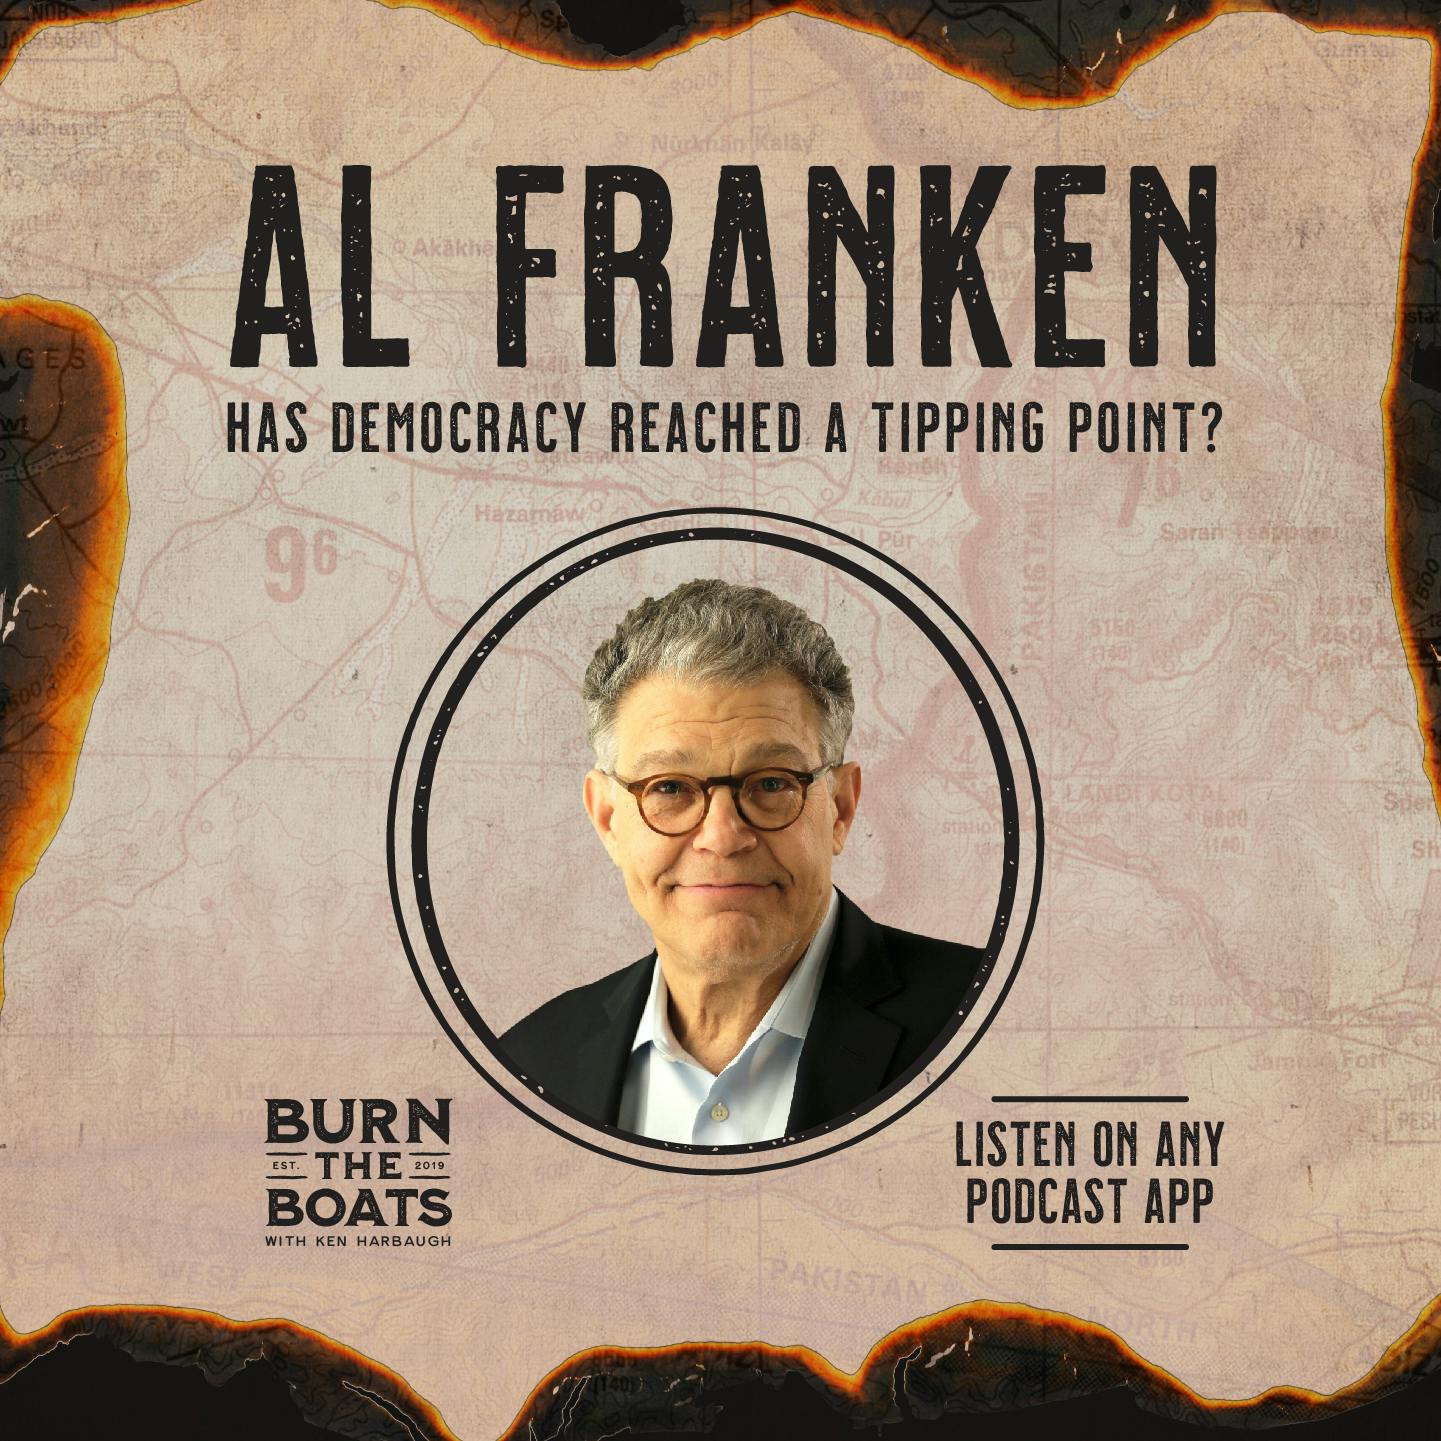 Al Franken: Has Democracy Reached a Tipping Point?